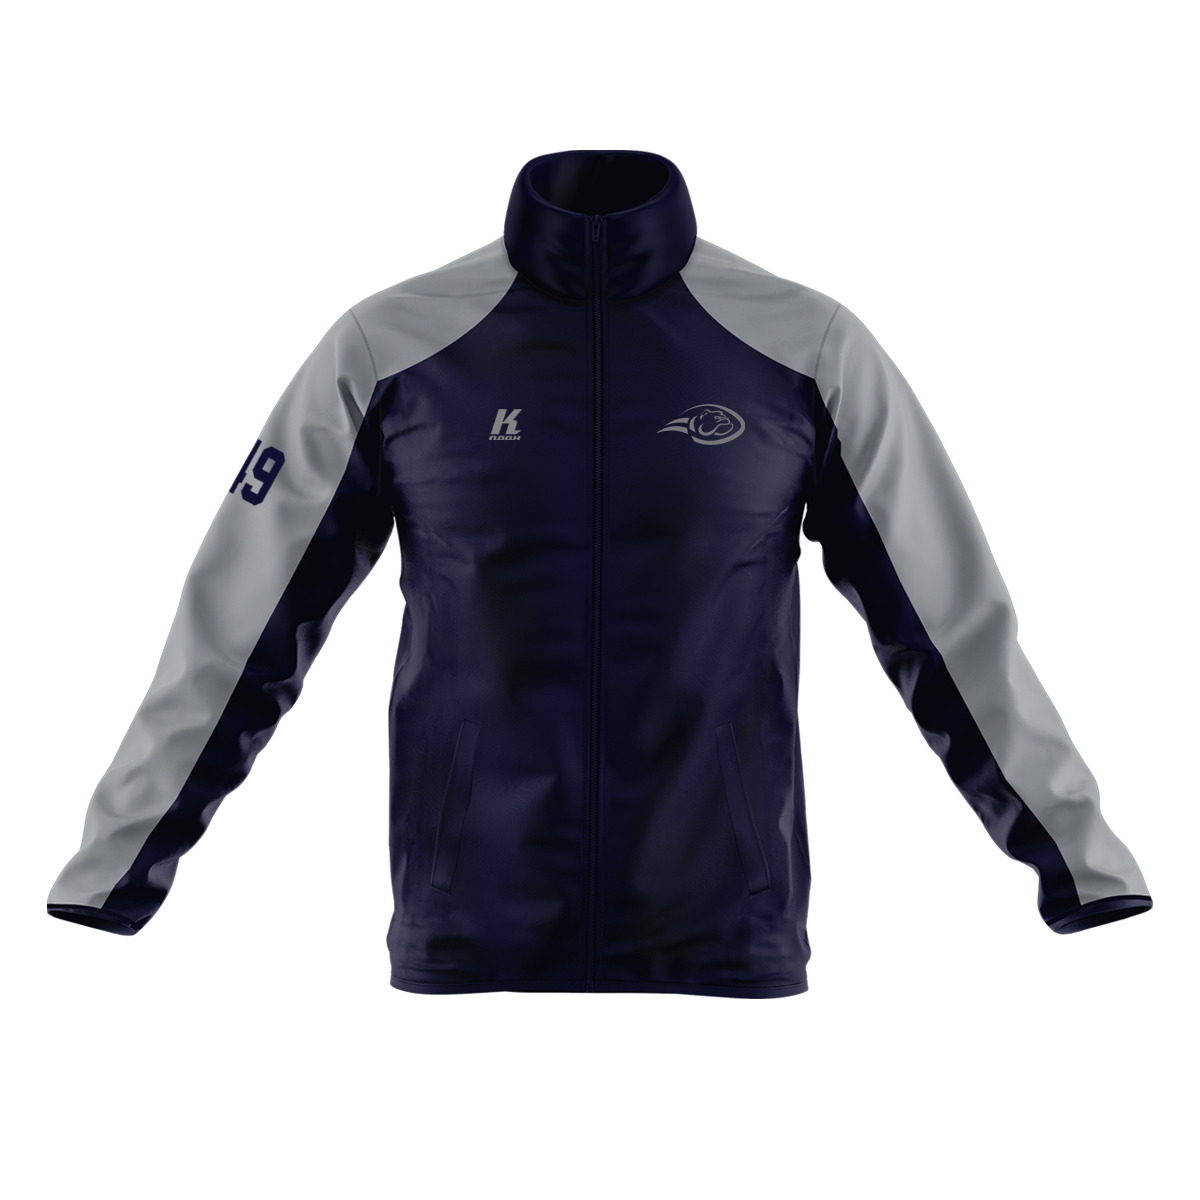 Wilddogs Pro Tracksuit Top Windstop with Playernumber/Initials